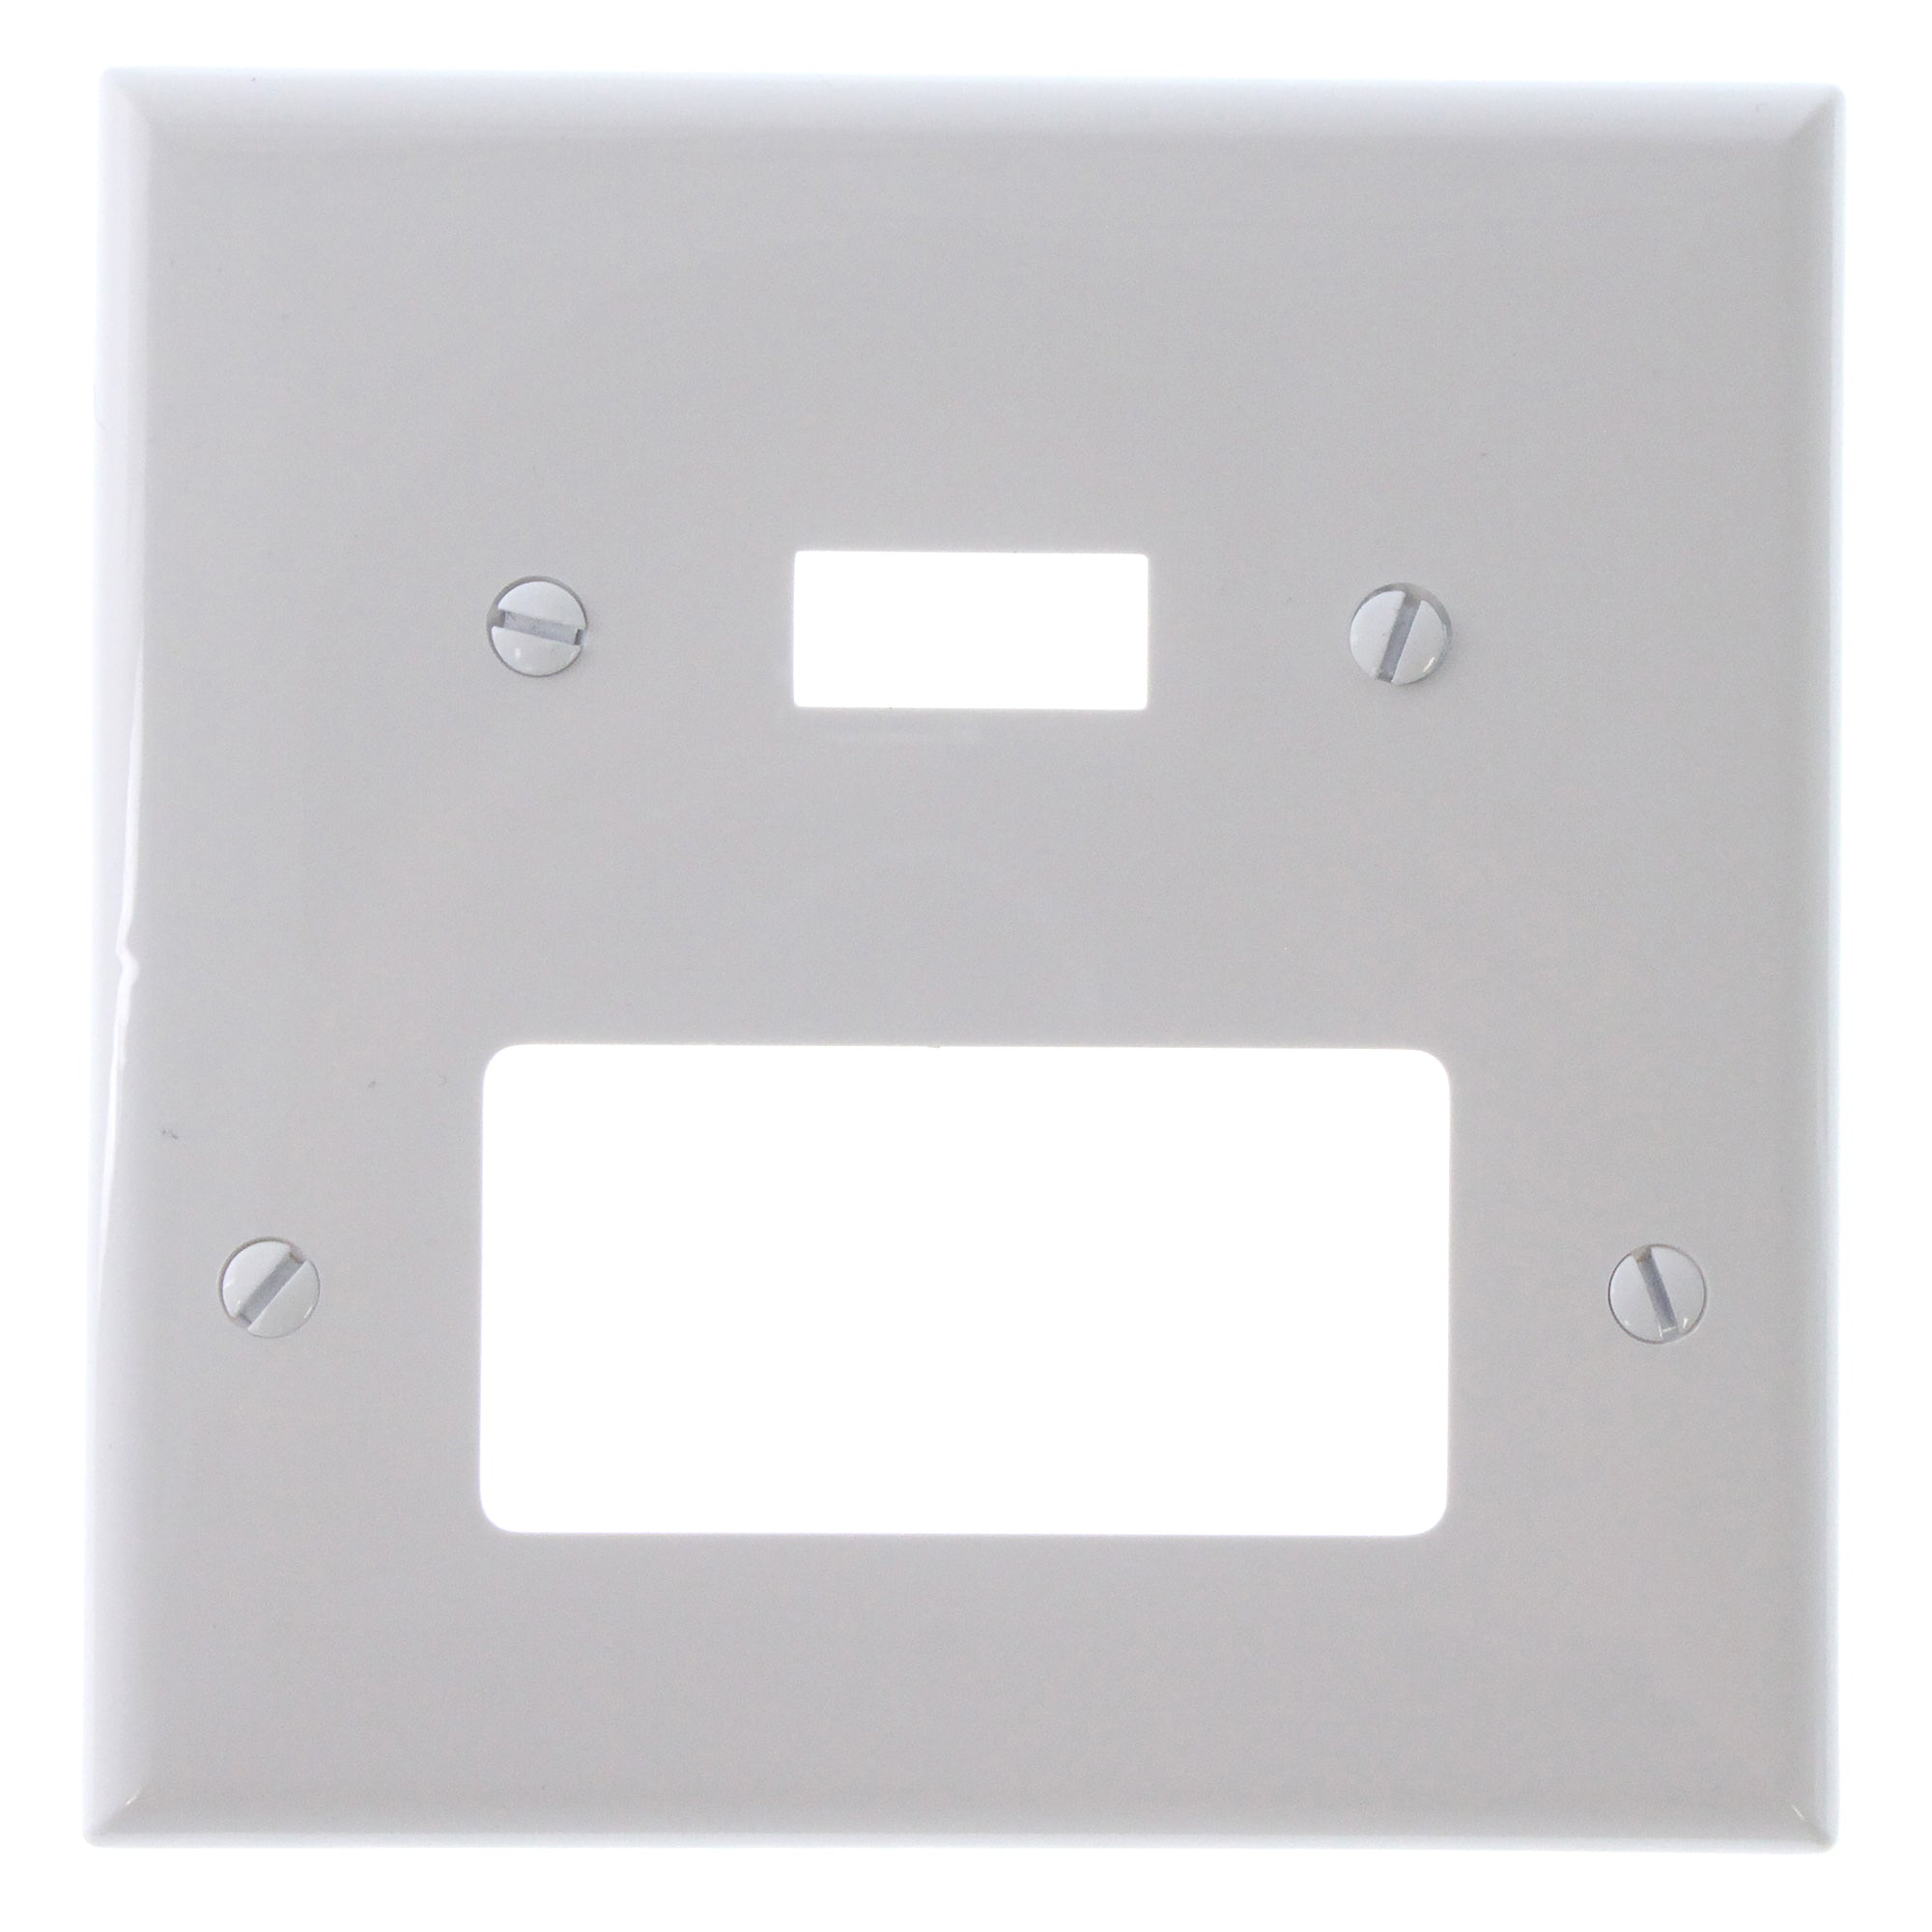 Cooper, COOPER LIGHTING 2 GANG WHITE DECORATOR TOGGLE WALL PLATE PJ126W WHITE (20 PACK)